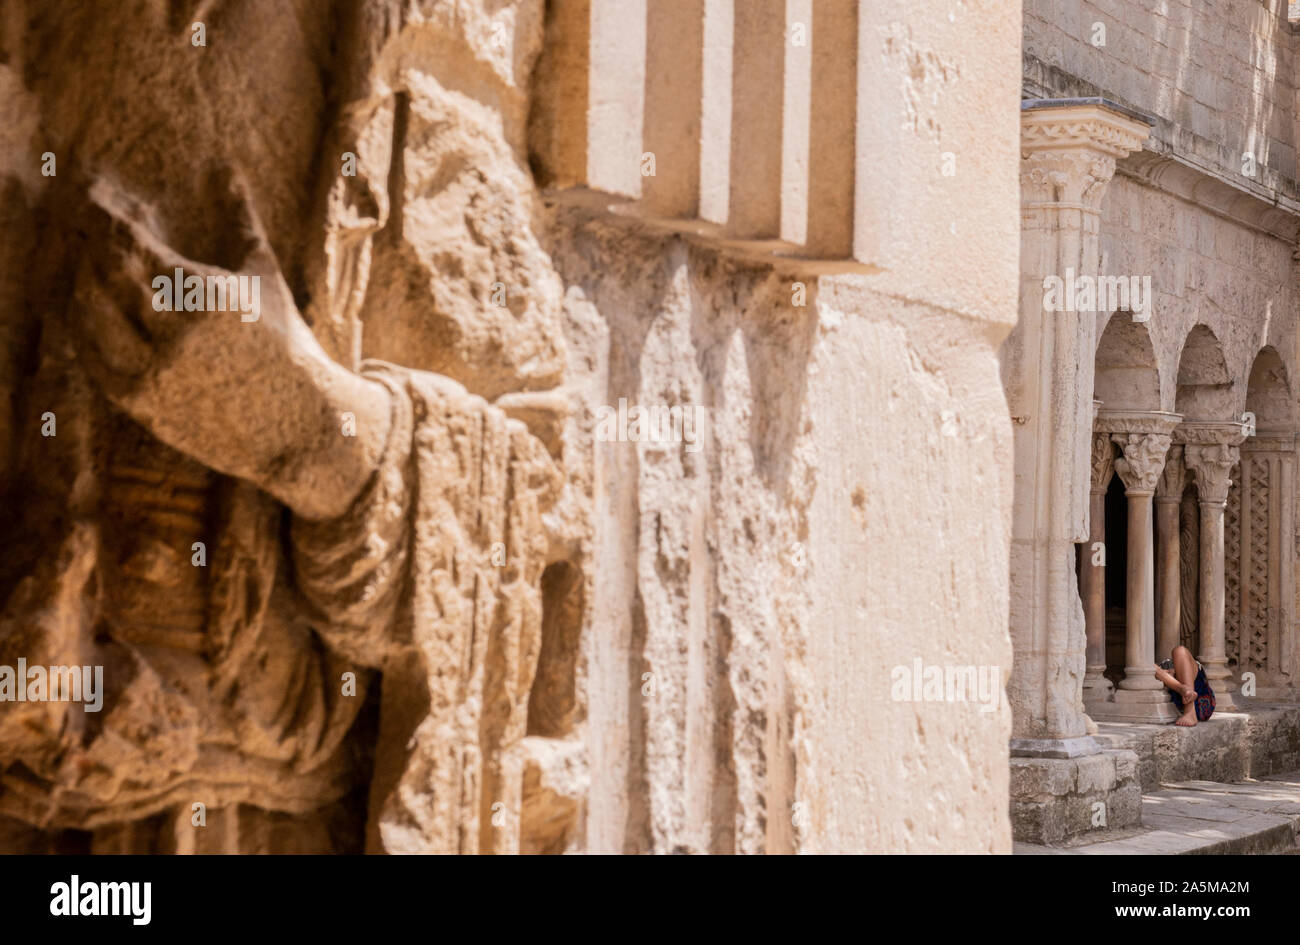 Woman lying down on stone ledge in church, Arles, France Stock Photo